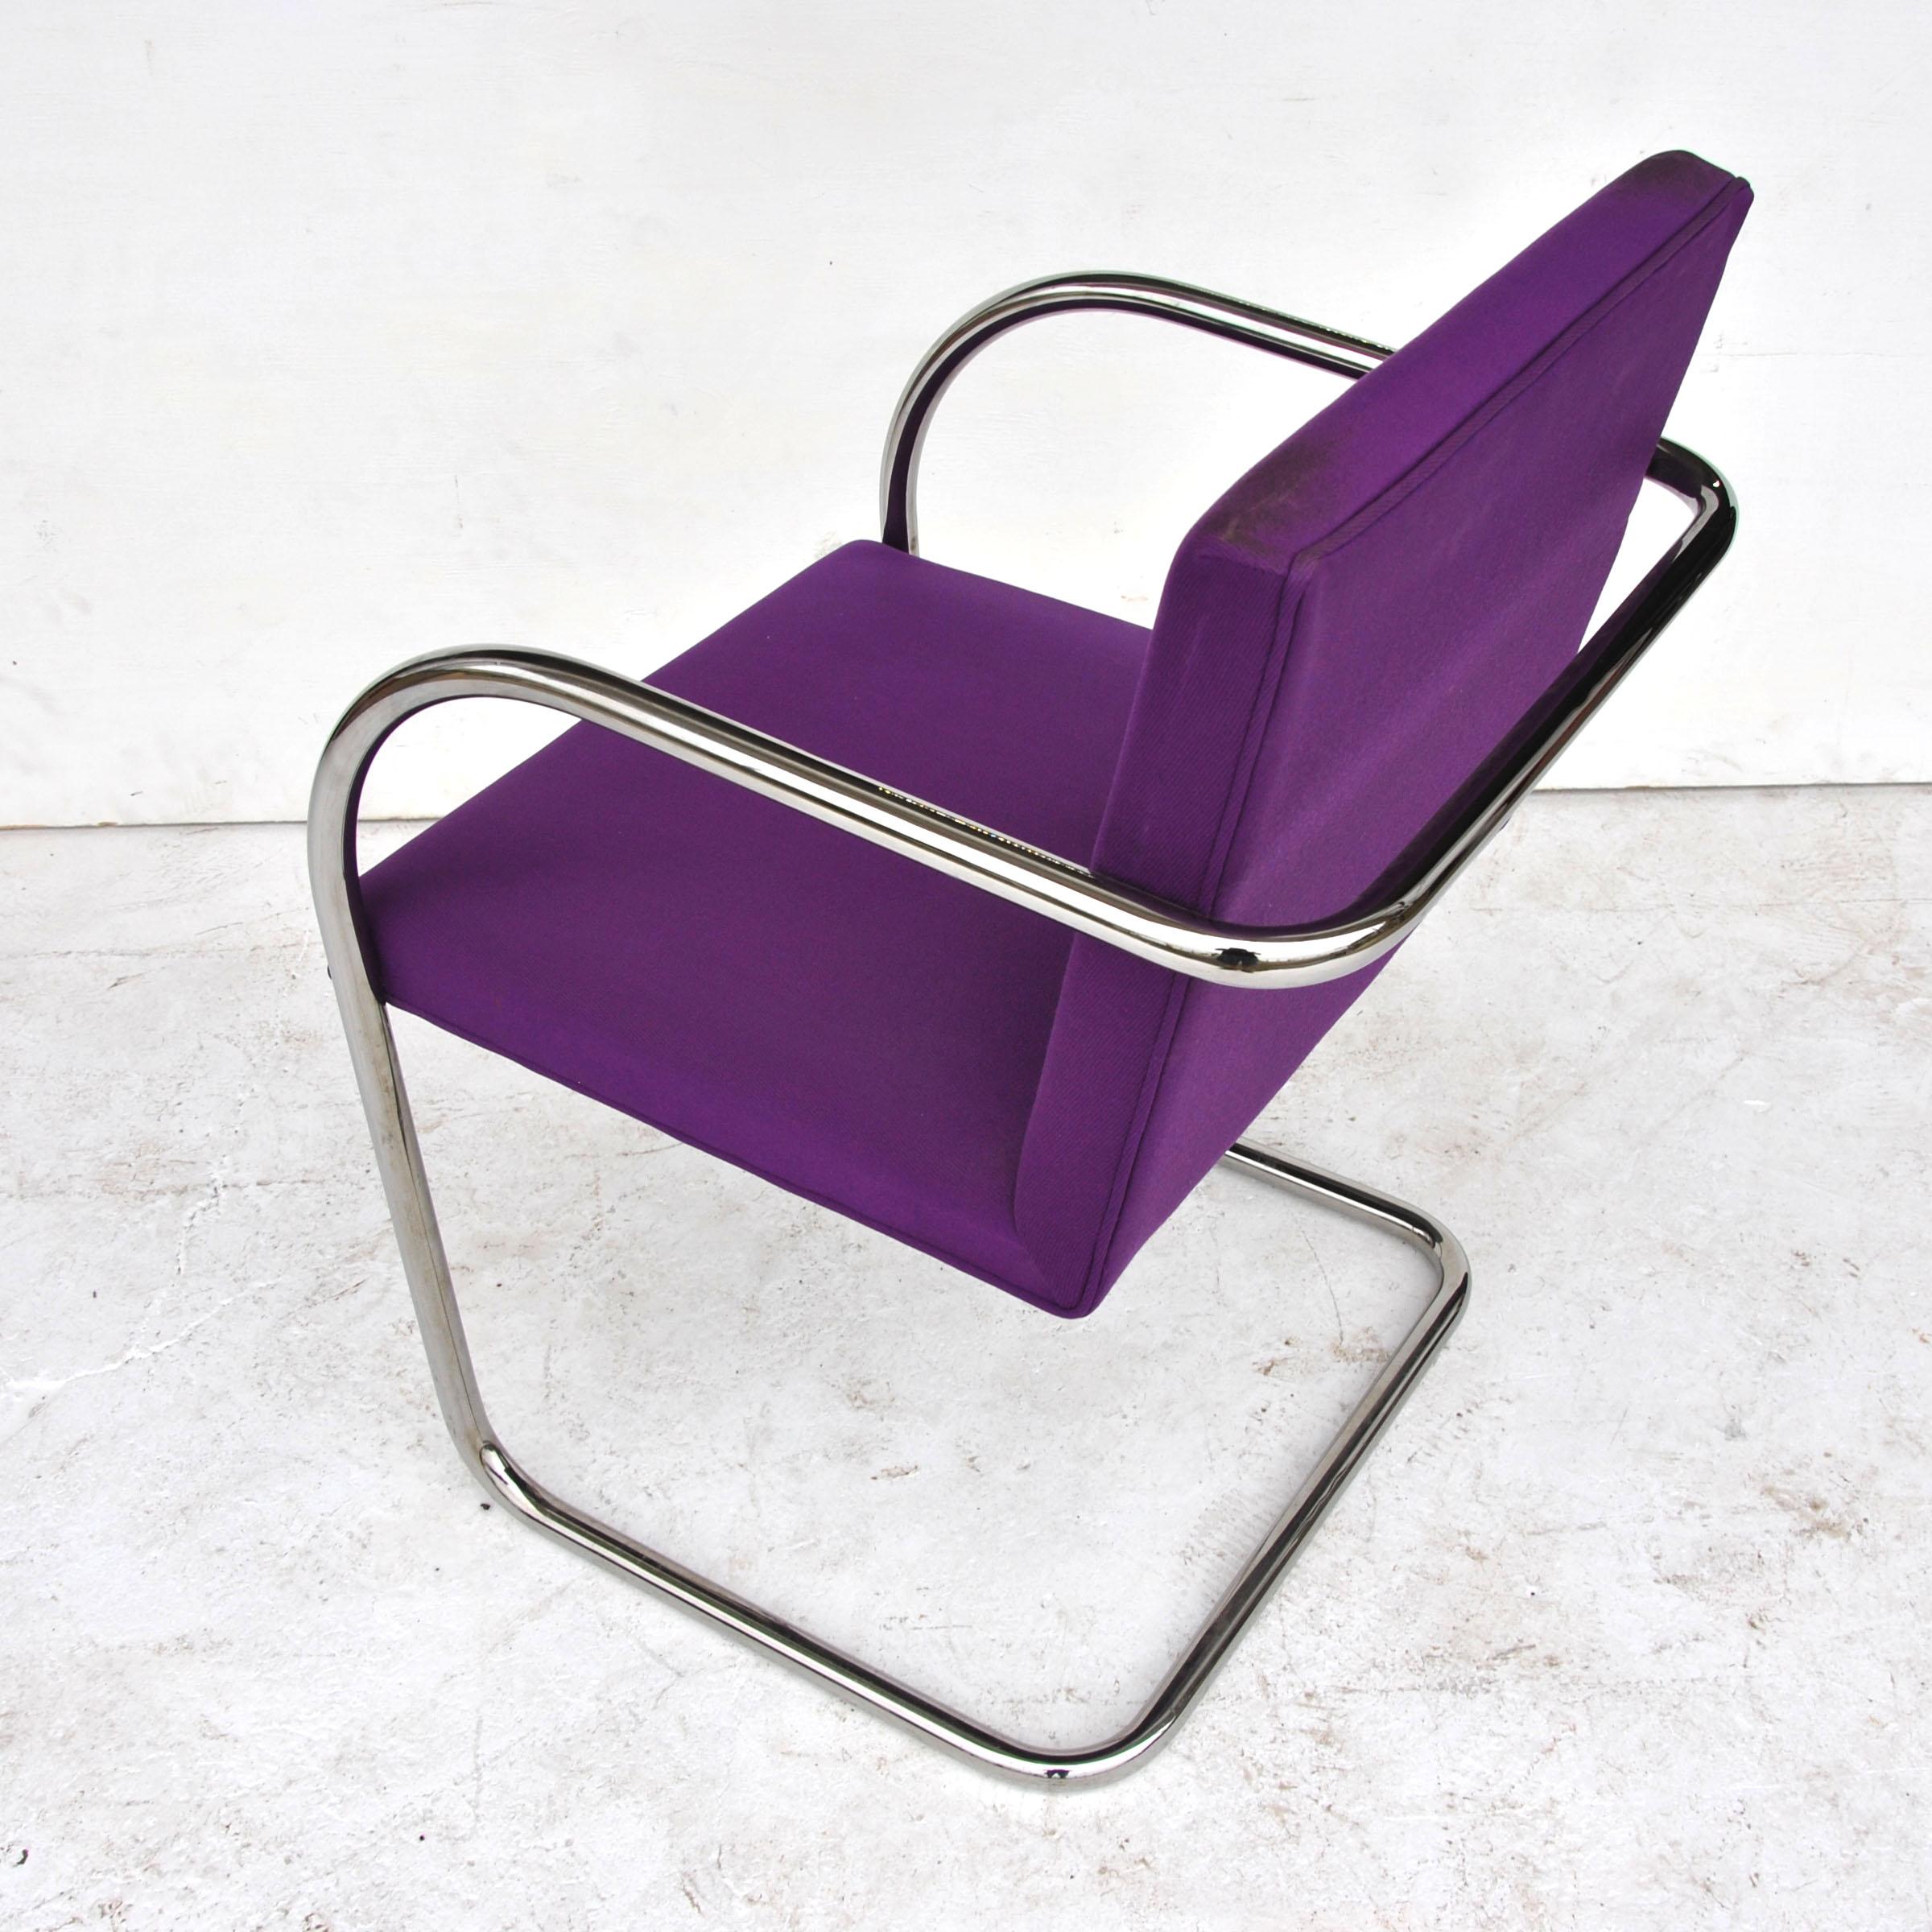 Knoll

Ludwig Mies van der Rohe

Mies van der Rohe began his career in architecture in Berlin, working as an architect first in the studio of Bruno Paul and then, like Le Corbusier and Walter Gropius, Peter Behrens. In the mid-1920s, he began to